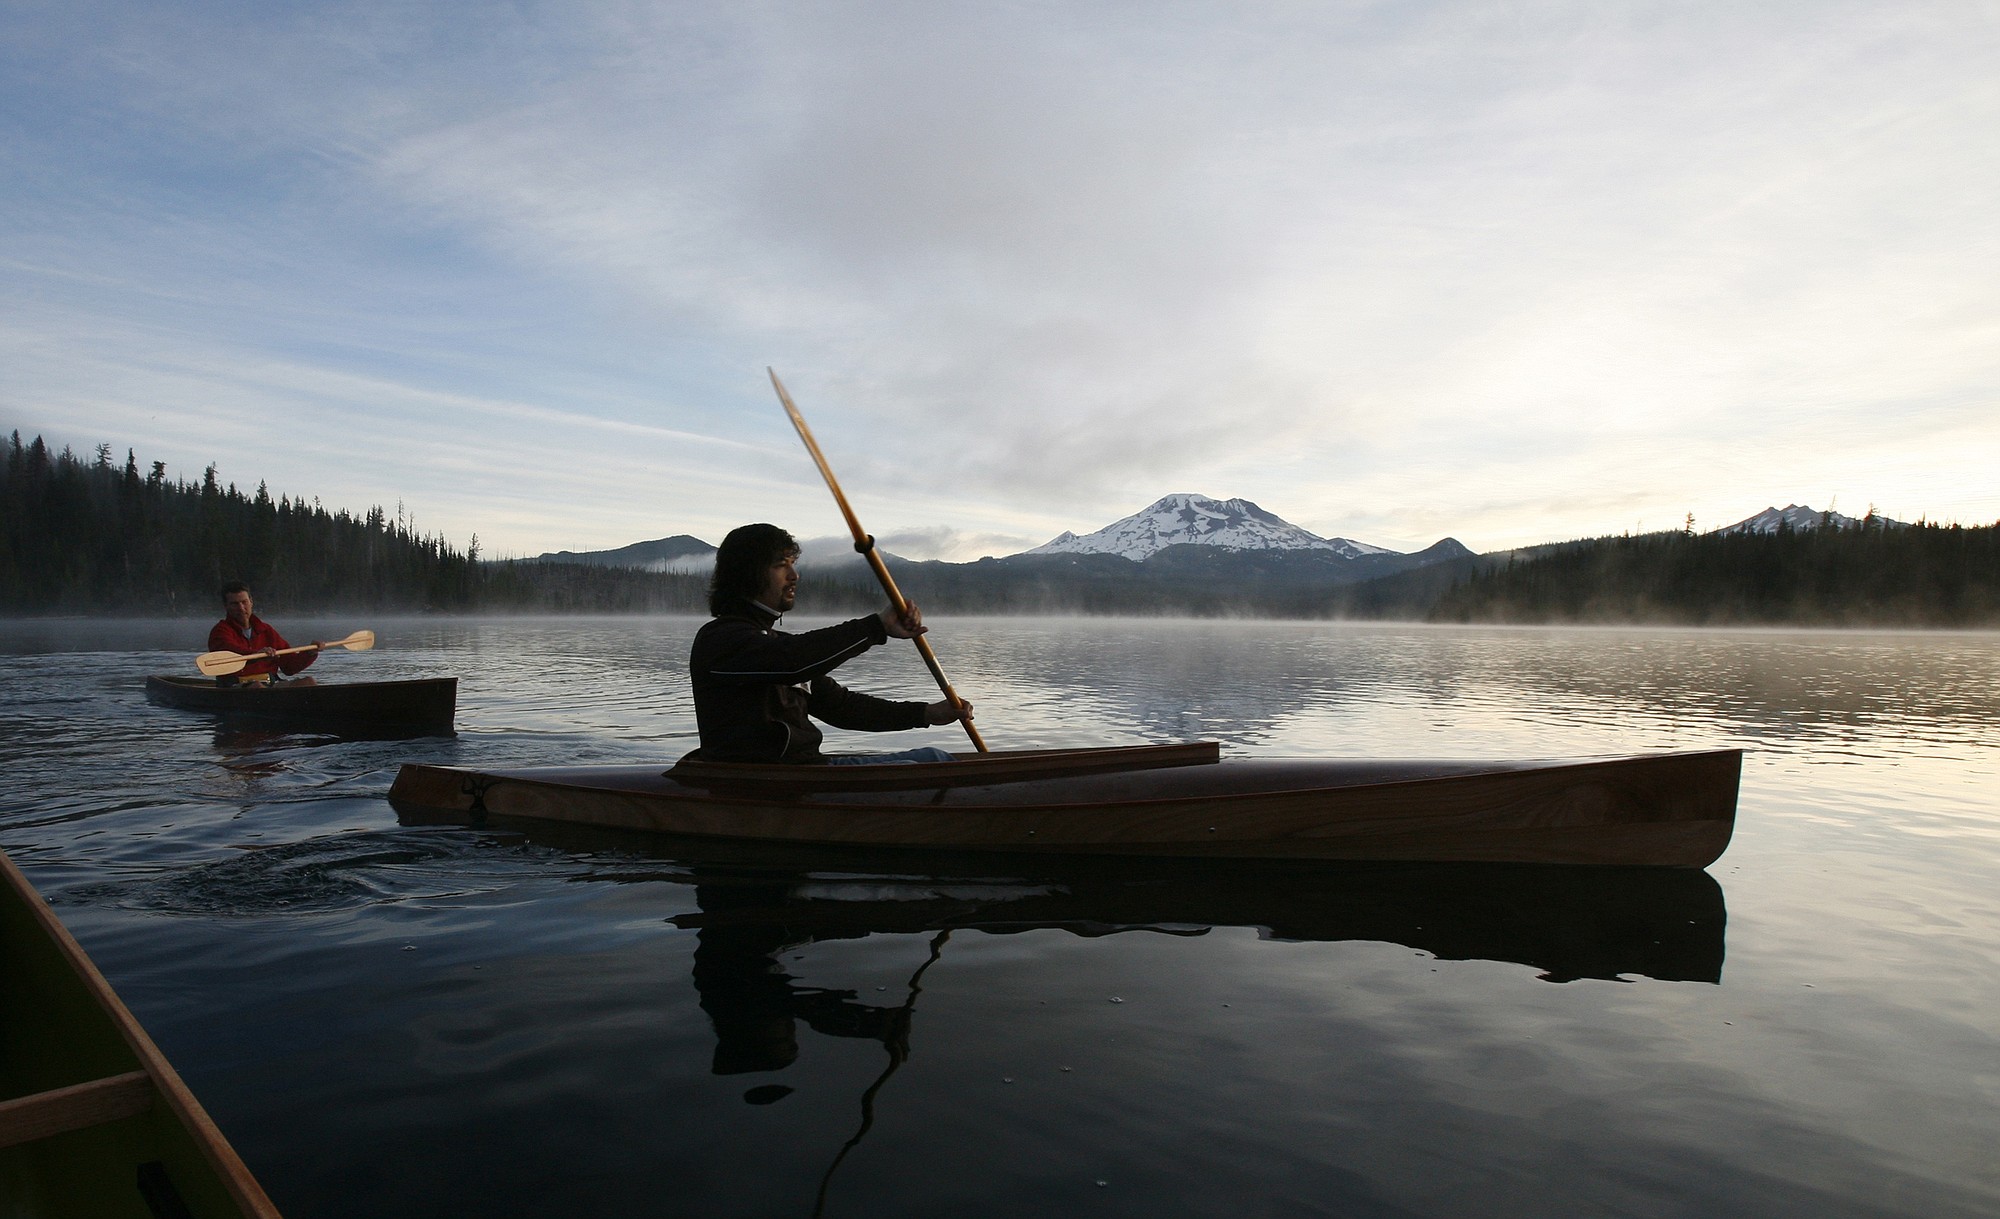 The Bulletin files
Mark Wells, 48, left, and Scott Seelye, 35, both of Bend, Ore., glide across the glassy waters of Elk Lake during an early paddle, near the Cascade Lakes Highway in central Oregon. In the distance is South Sister, the youngest and tallest in a trio of Cascade Range volcanos.